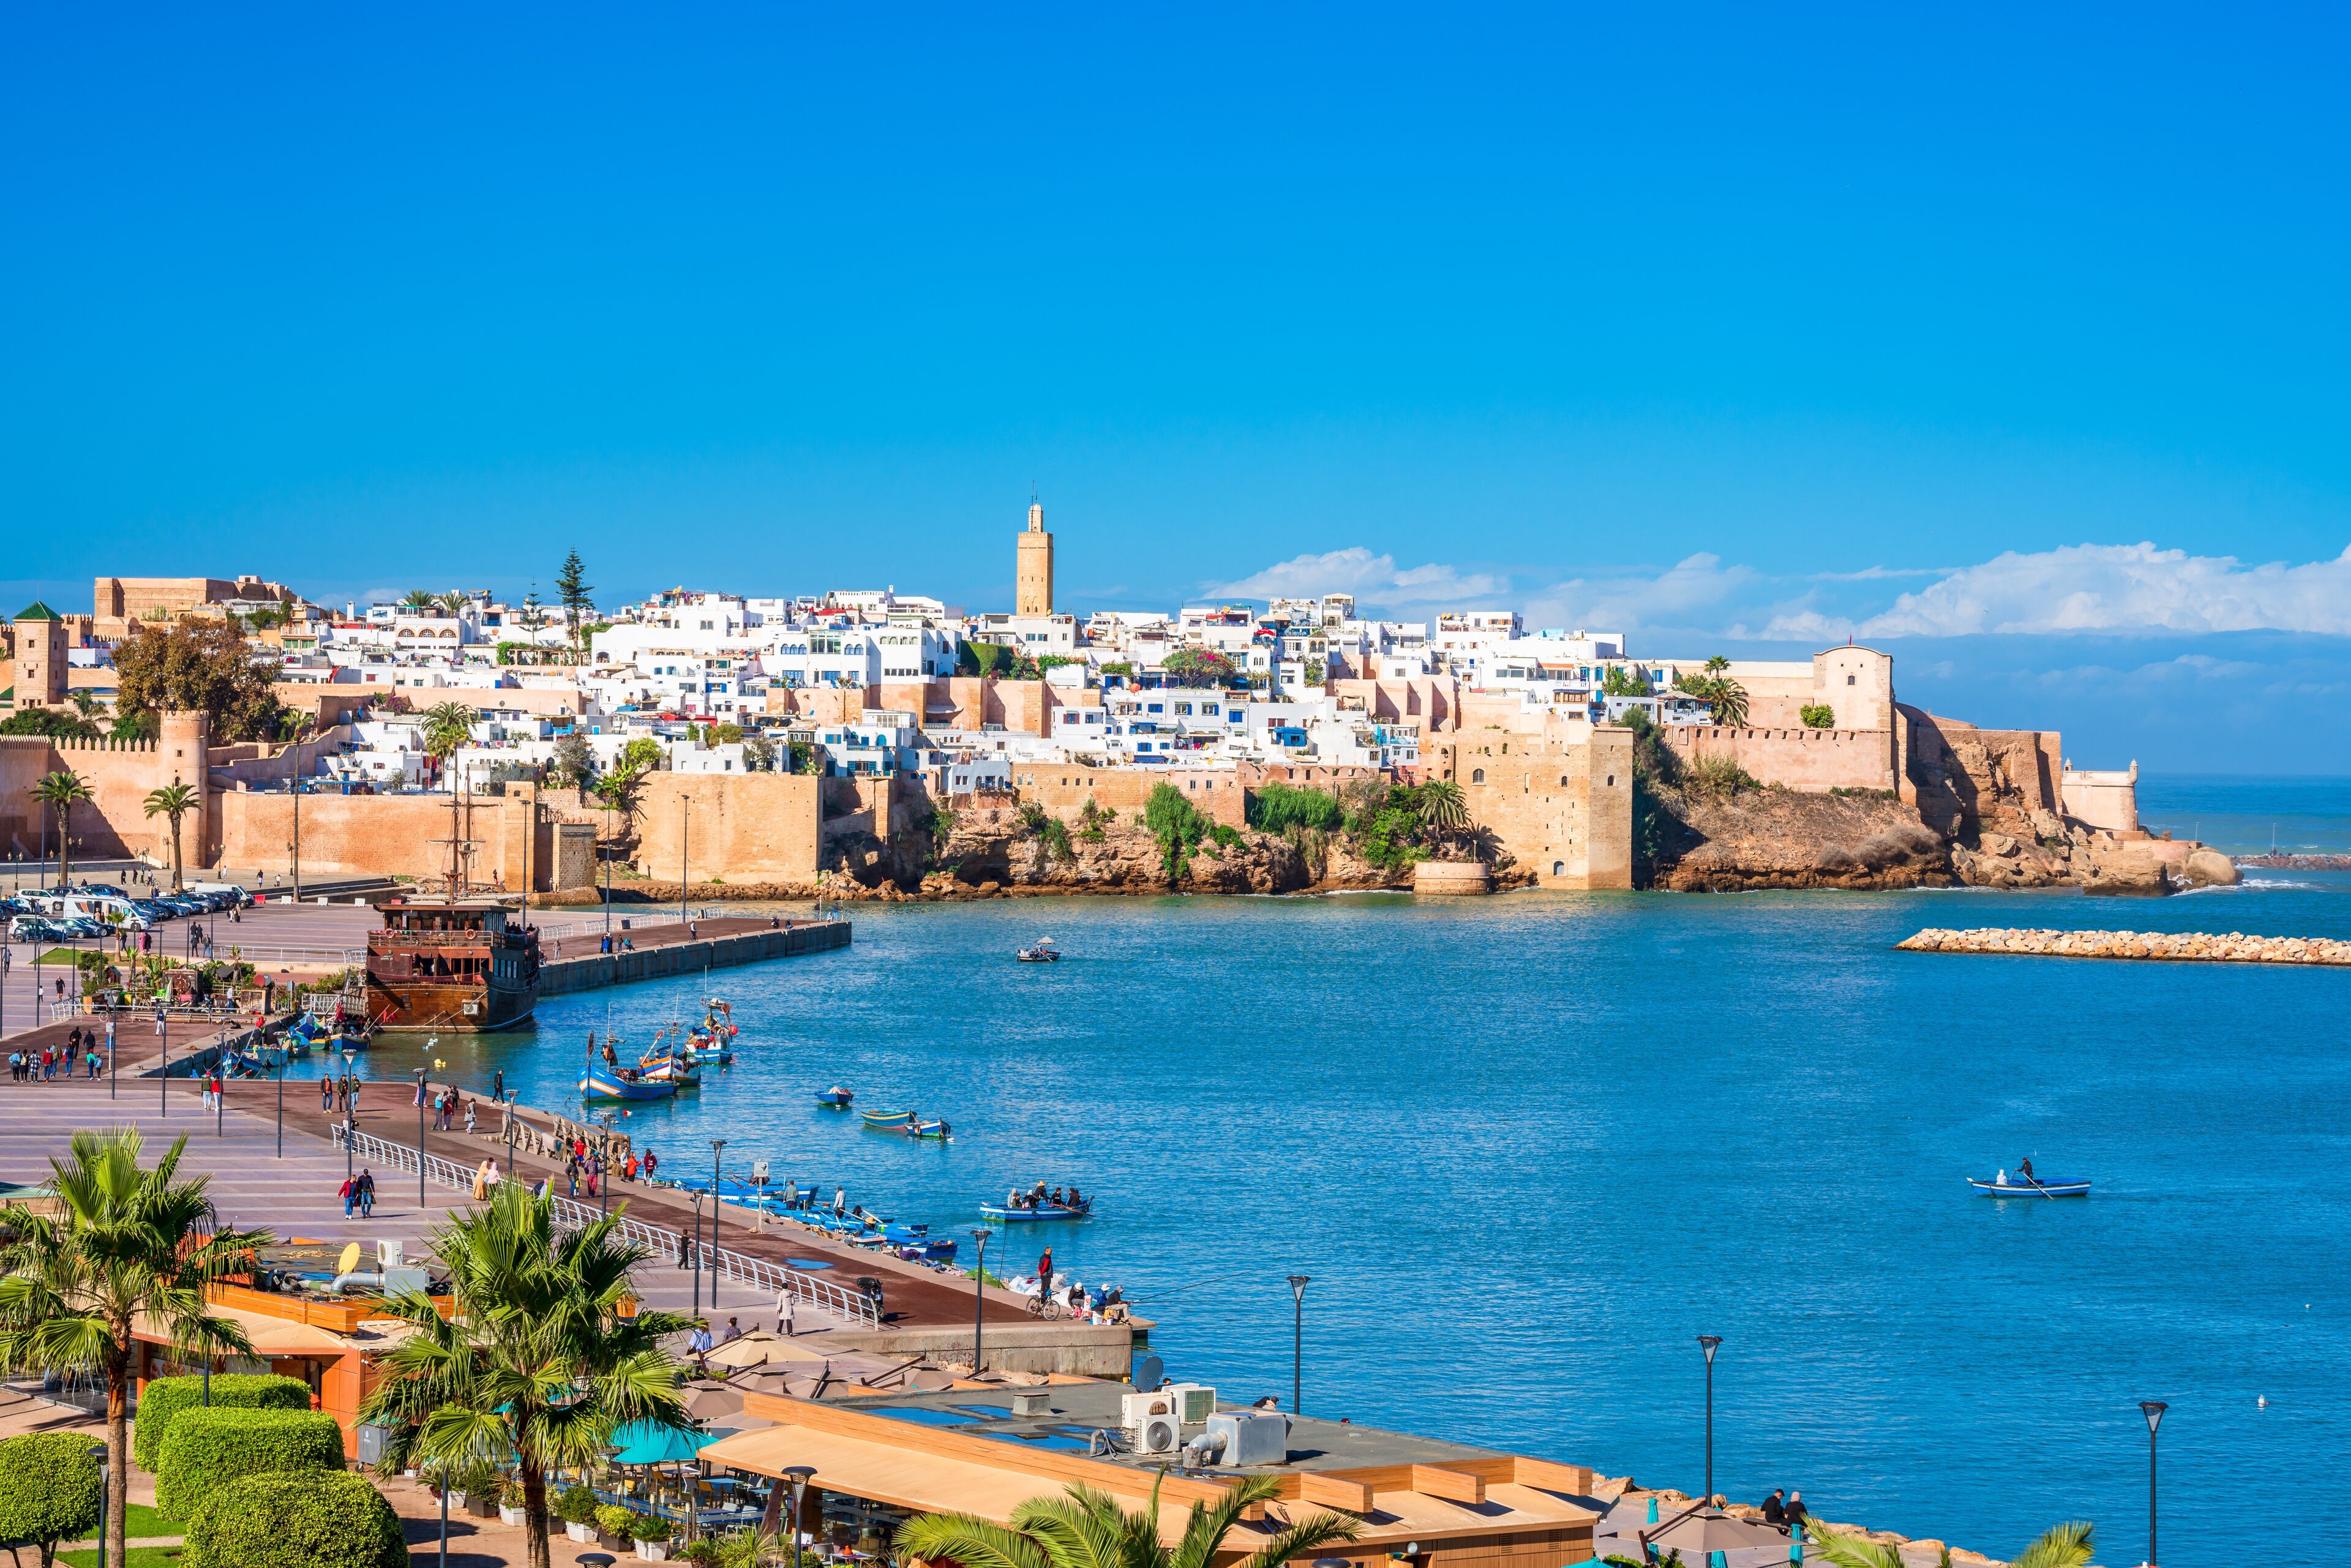 Kasbah del Oudayas or Oudayas and Bouregreg River seen from the Medina district in Rabat, Morocco